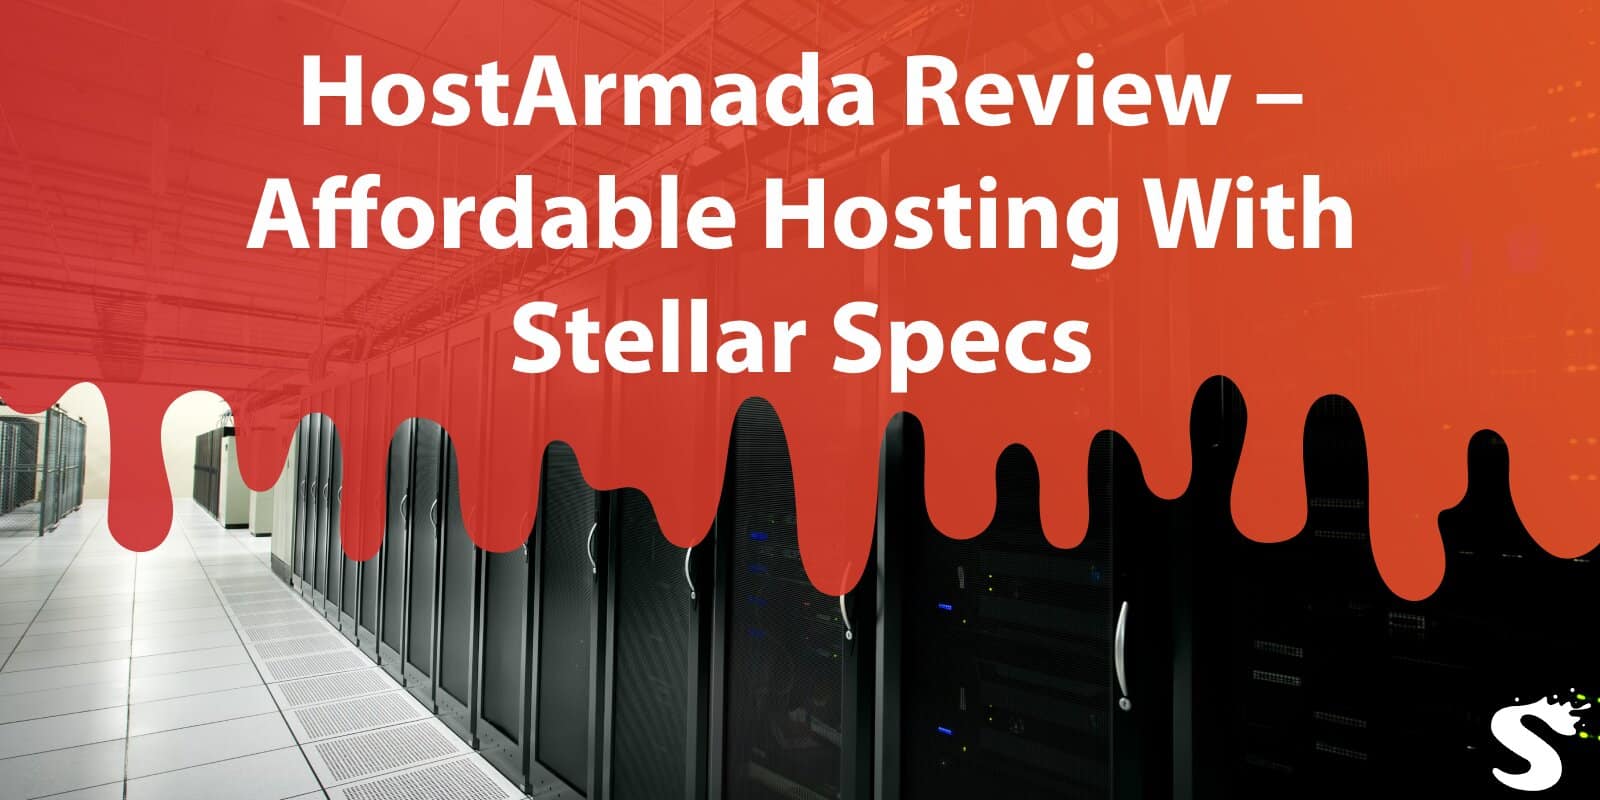 HostArmada Review - Affordable Hosting With Stellar Specs